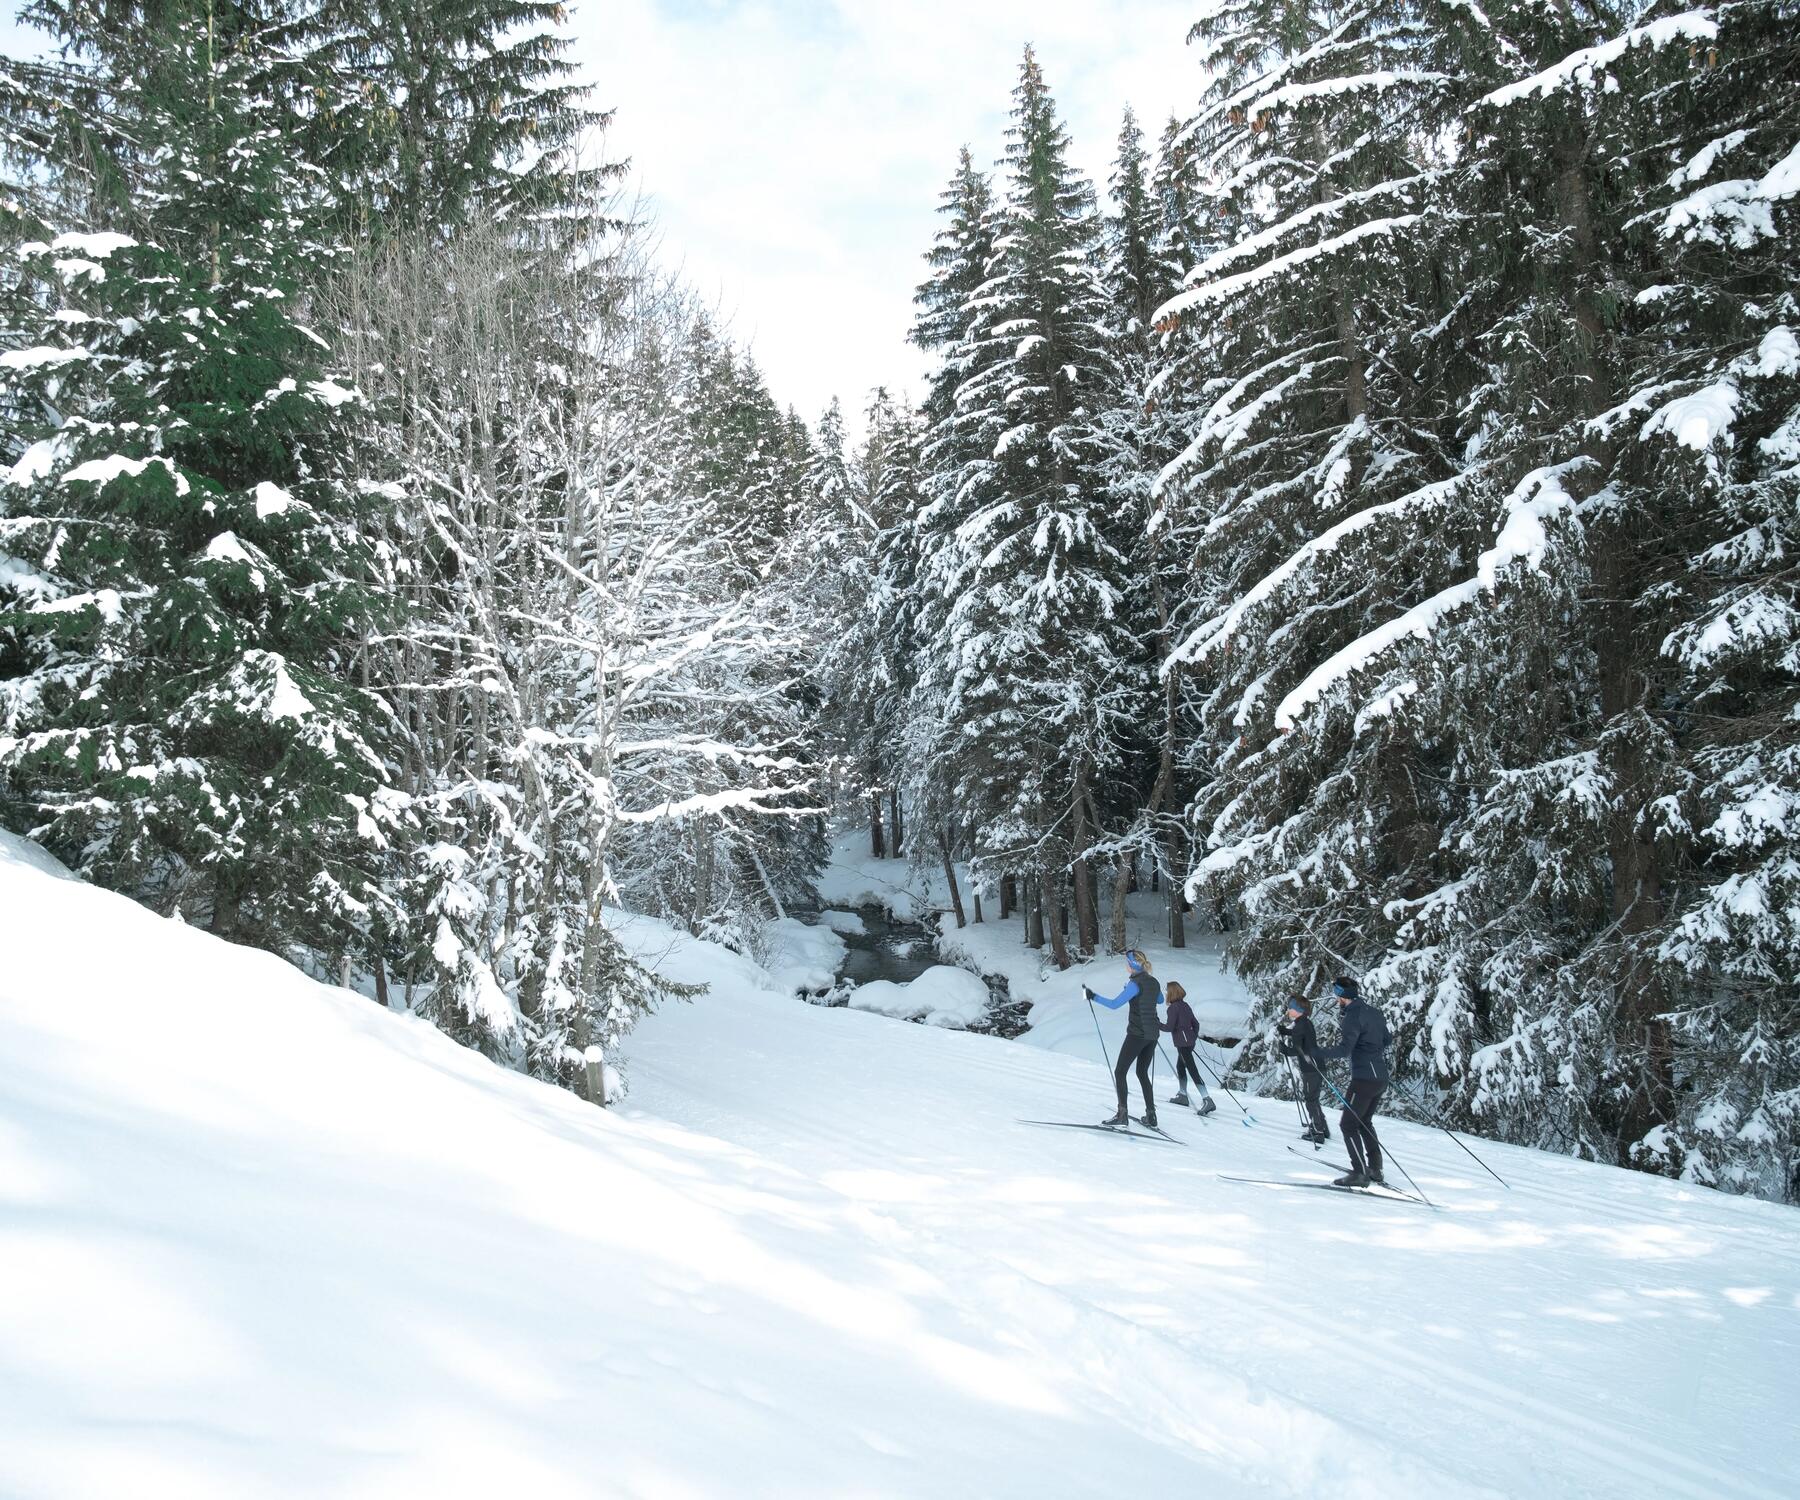 A family cross-country skiing